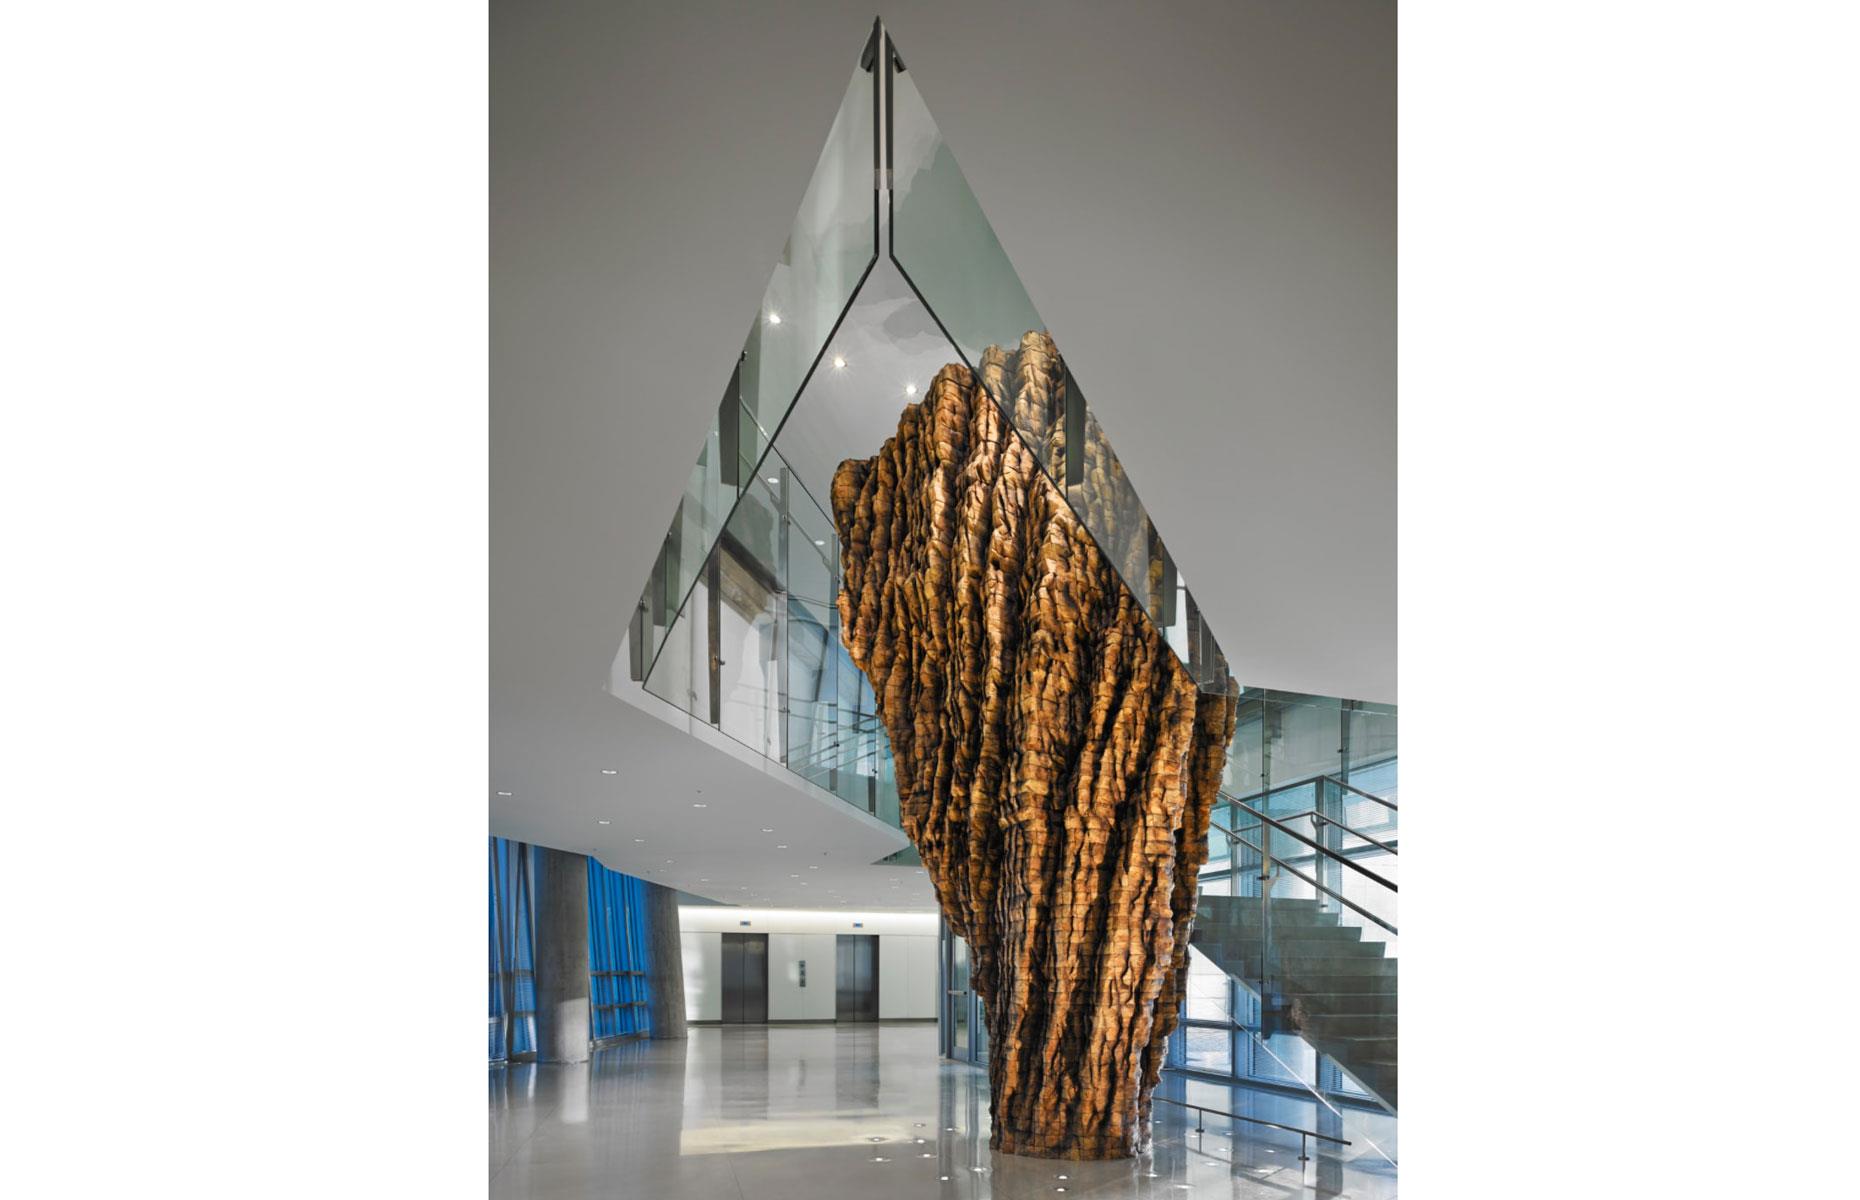 Purchase and removal of a wooden art installation: $1.2 million